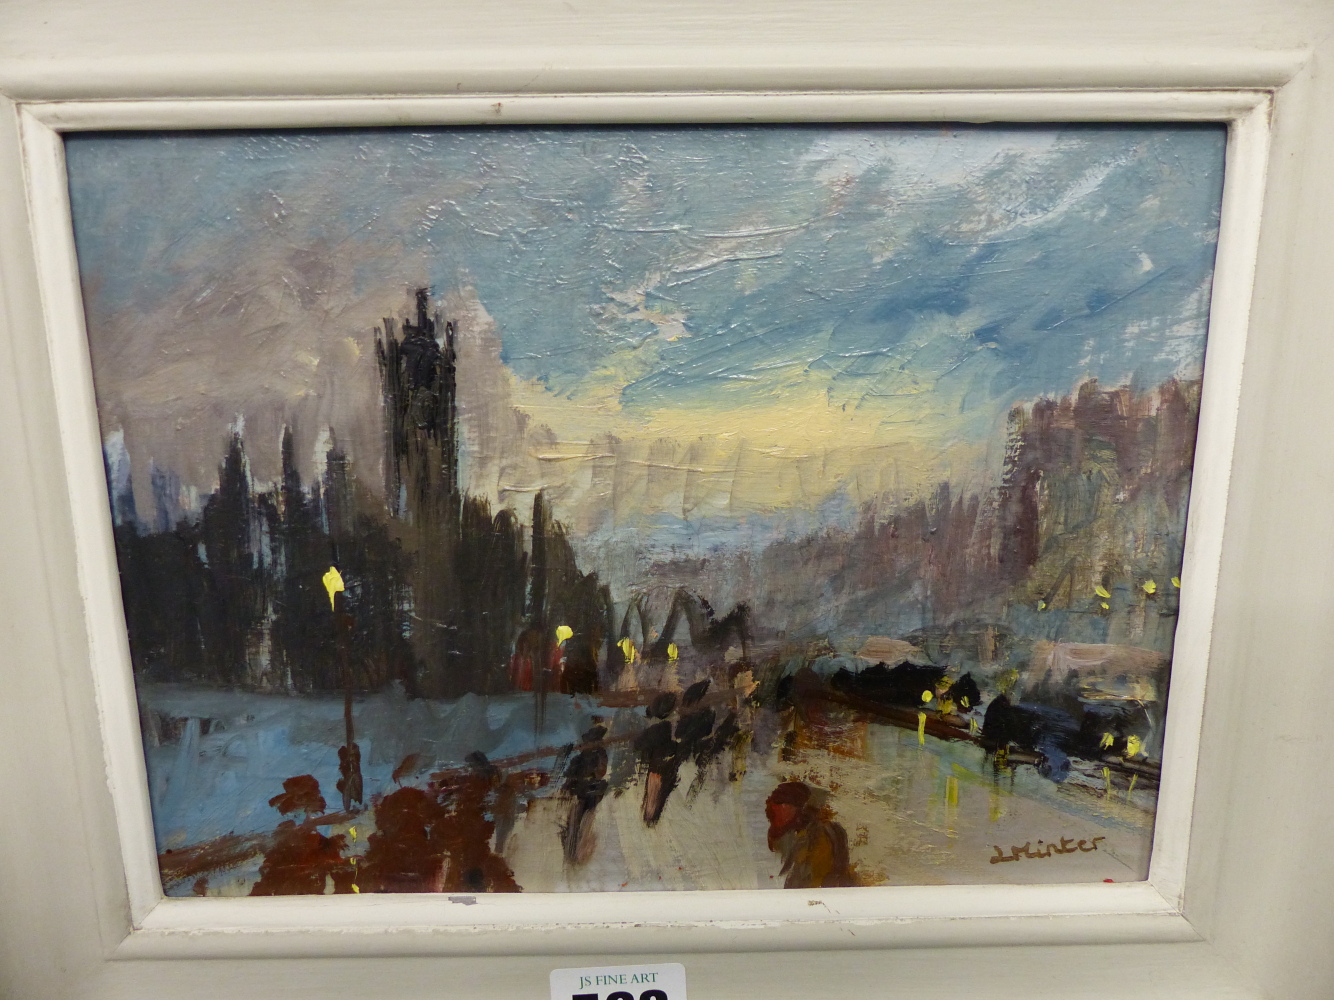 LYNDA MINTER (20TH/21ST CENTURY), CITY VIEW AT NIGHT, SIGNED, OIL ON CANVAS, 22.5 x 16.5cm. - Image 2 of 6